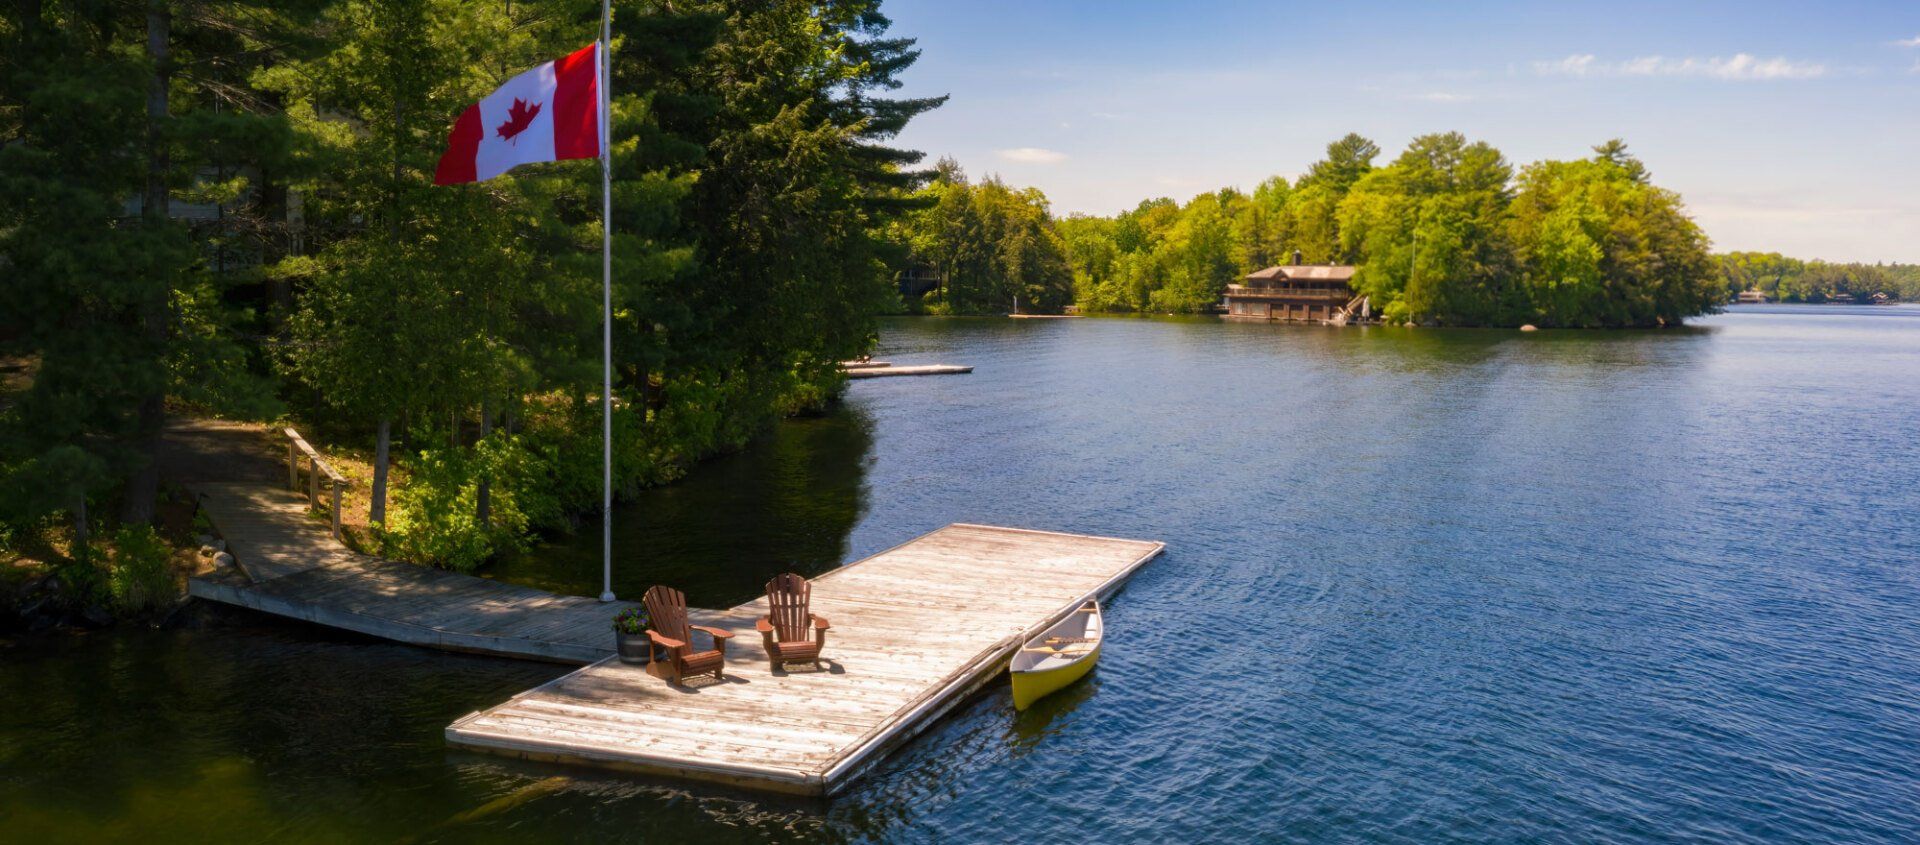 Things to see and Do in Muskoka Summer 2022